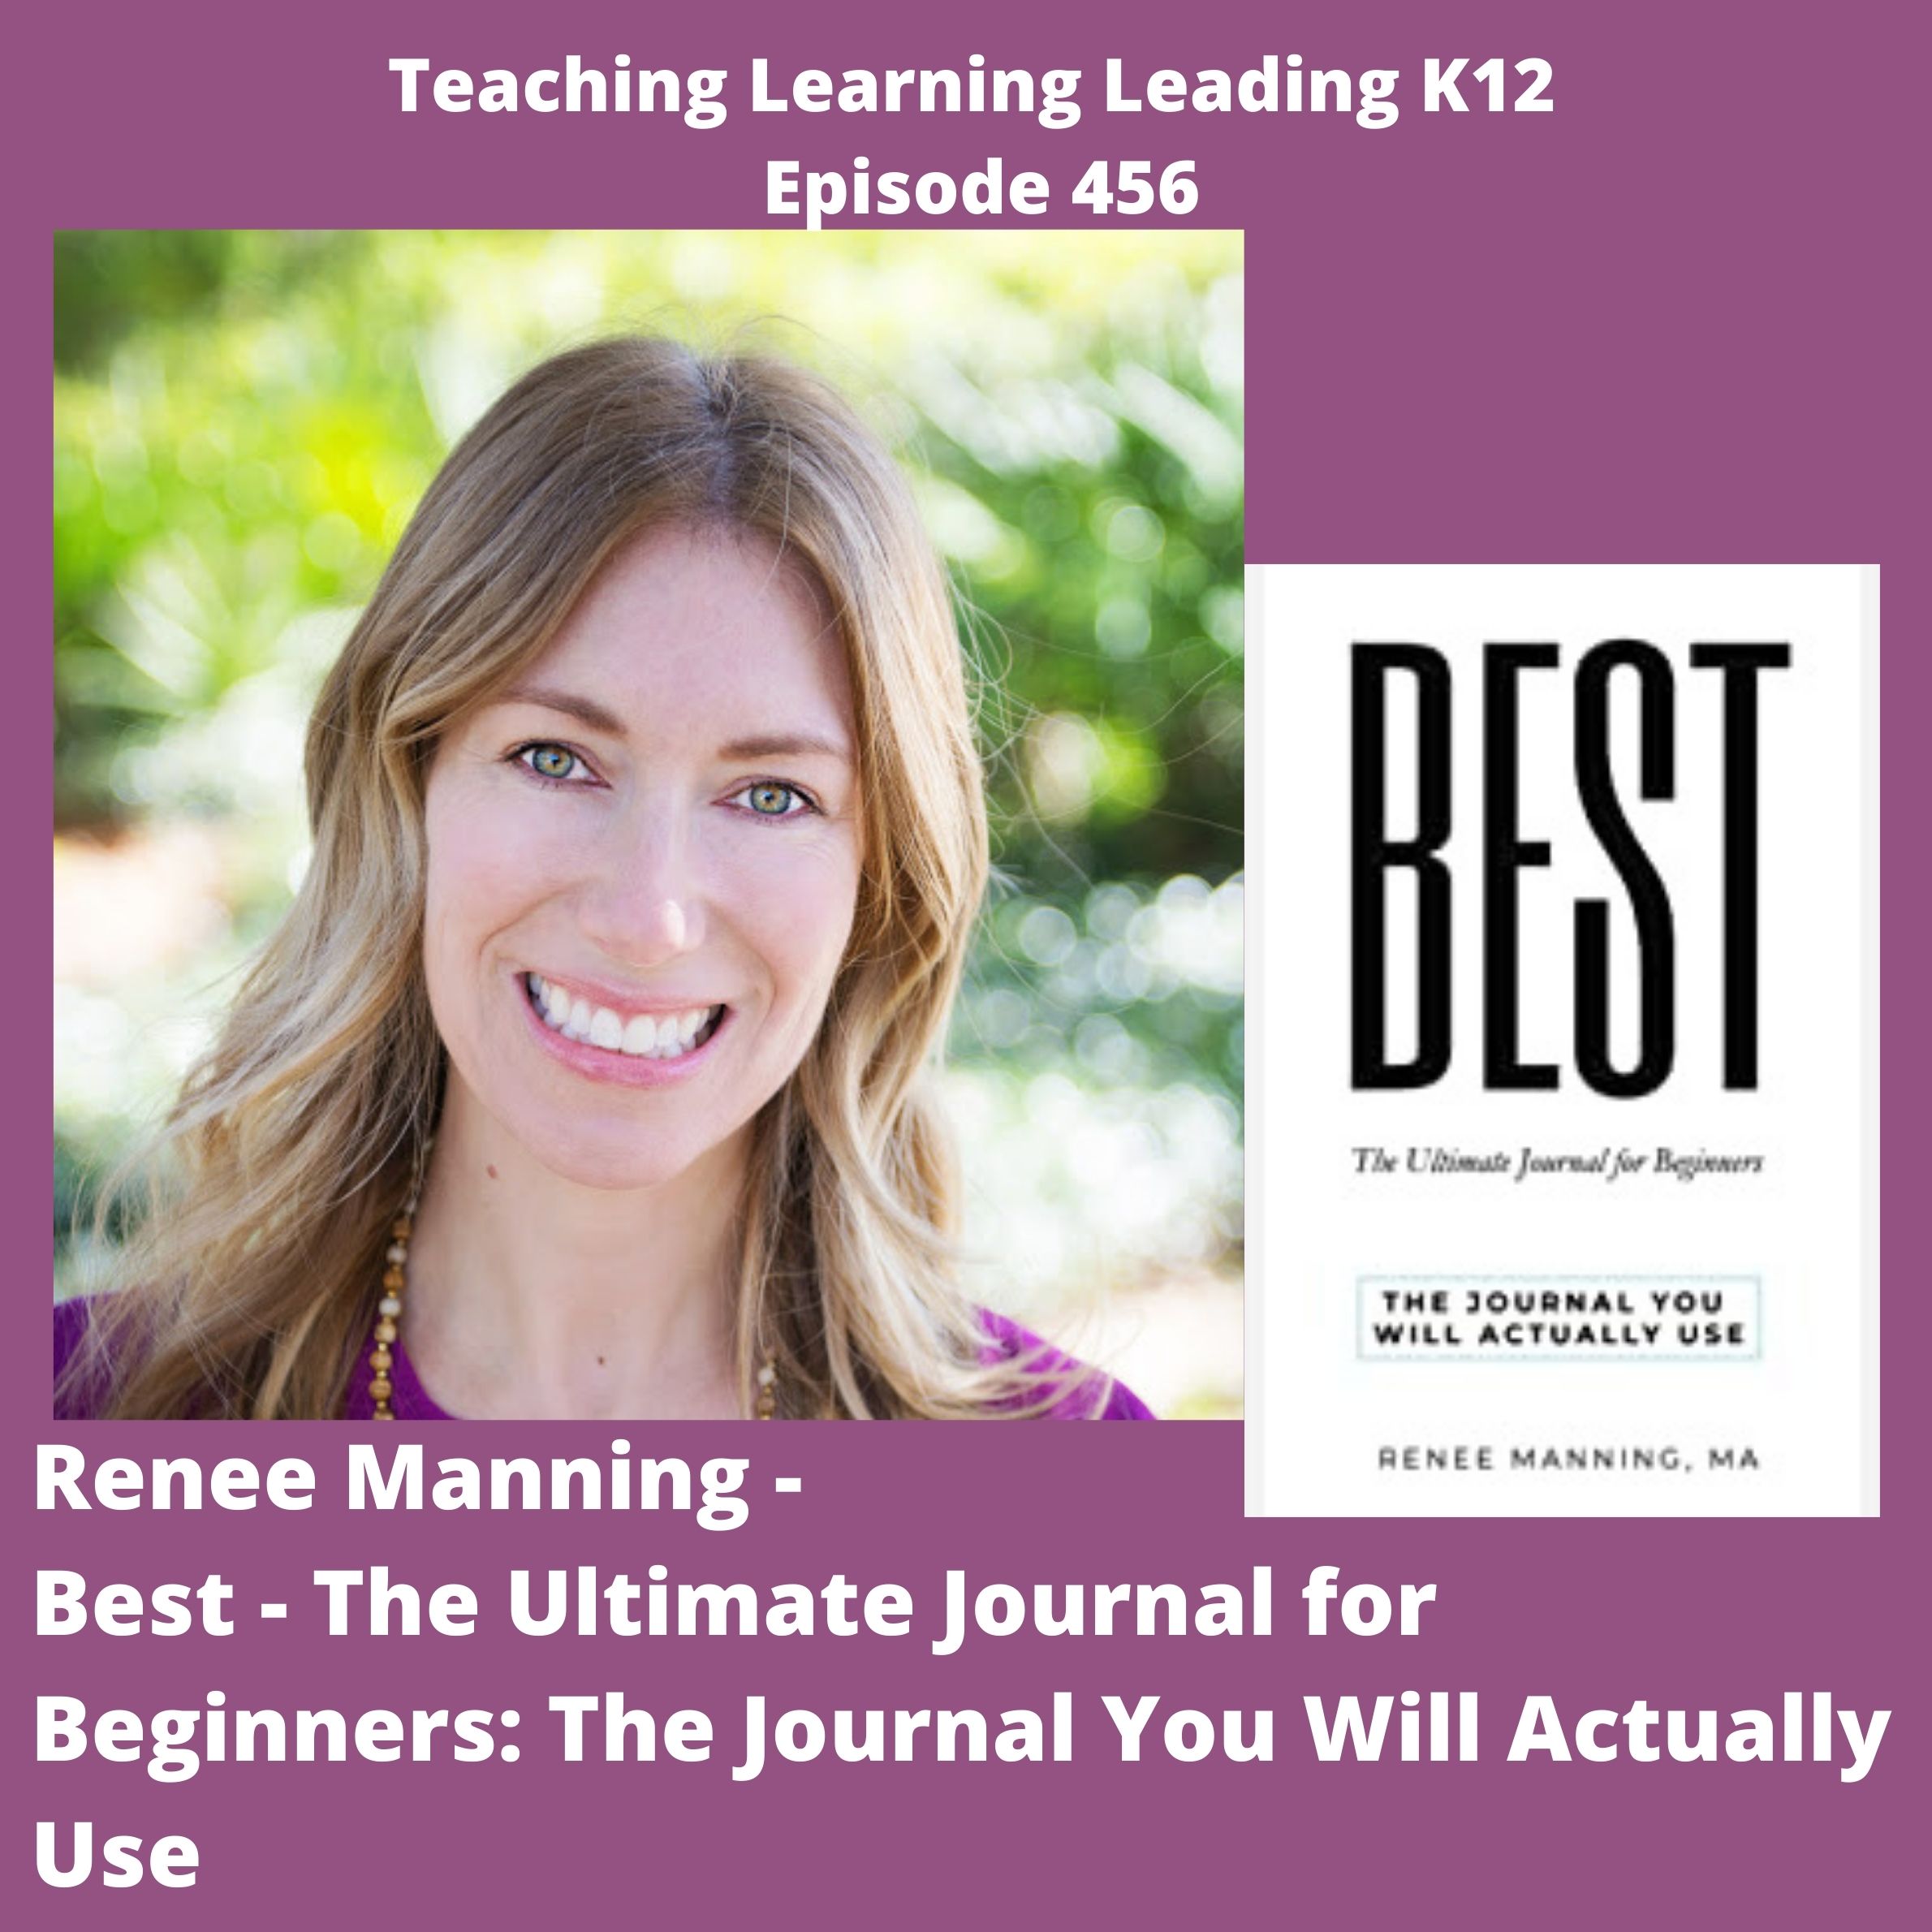 Renee Manning - Best - The Ultimate Journal for Beginners: The Journal You Will Actually Use - 456